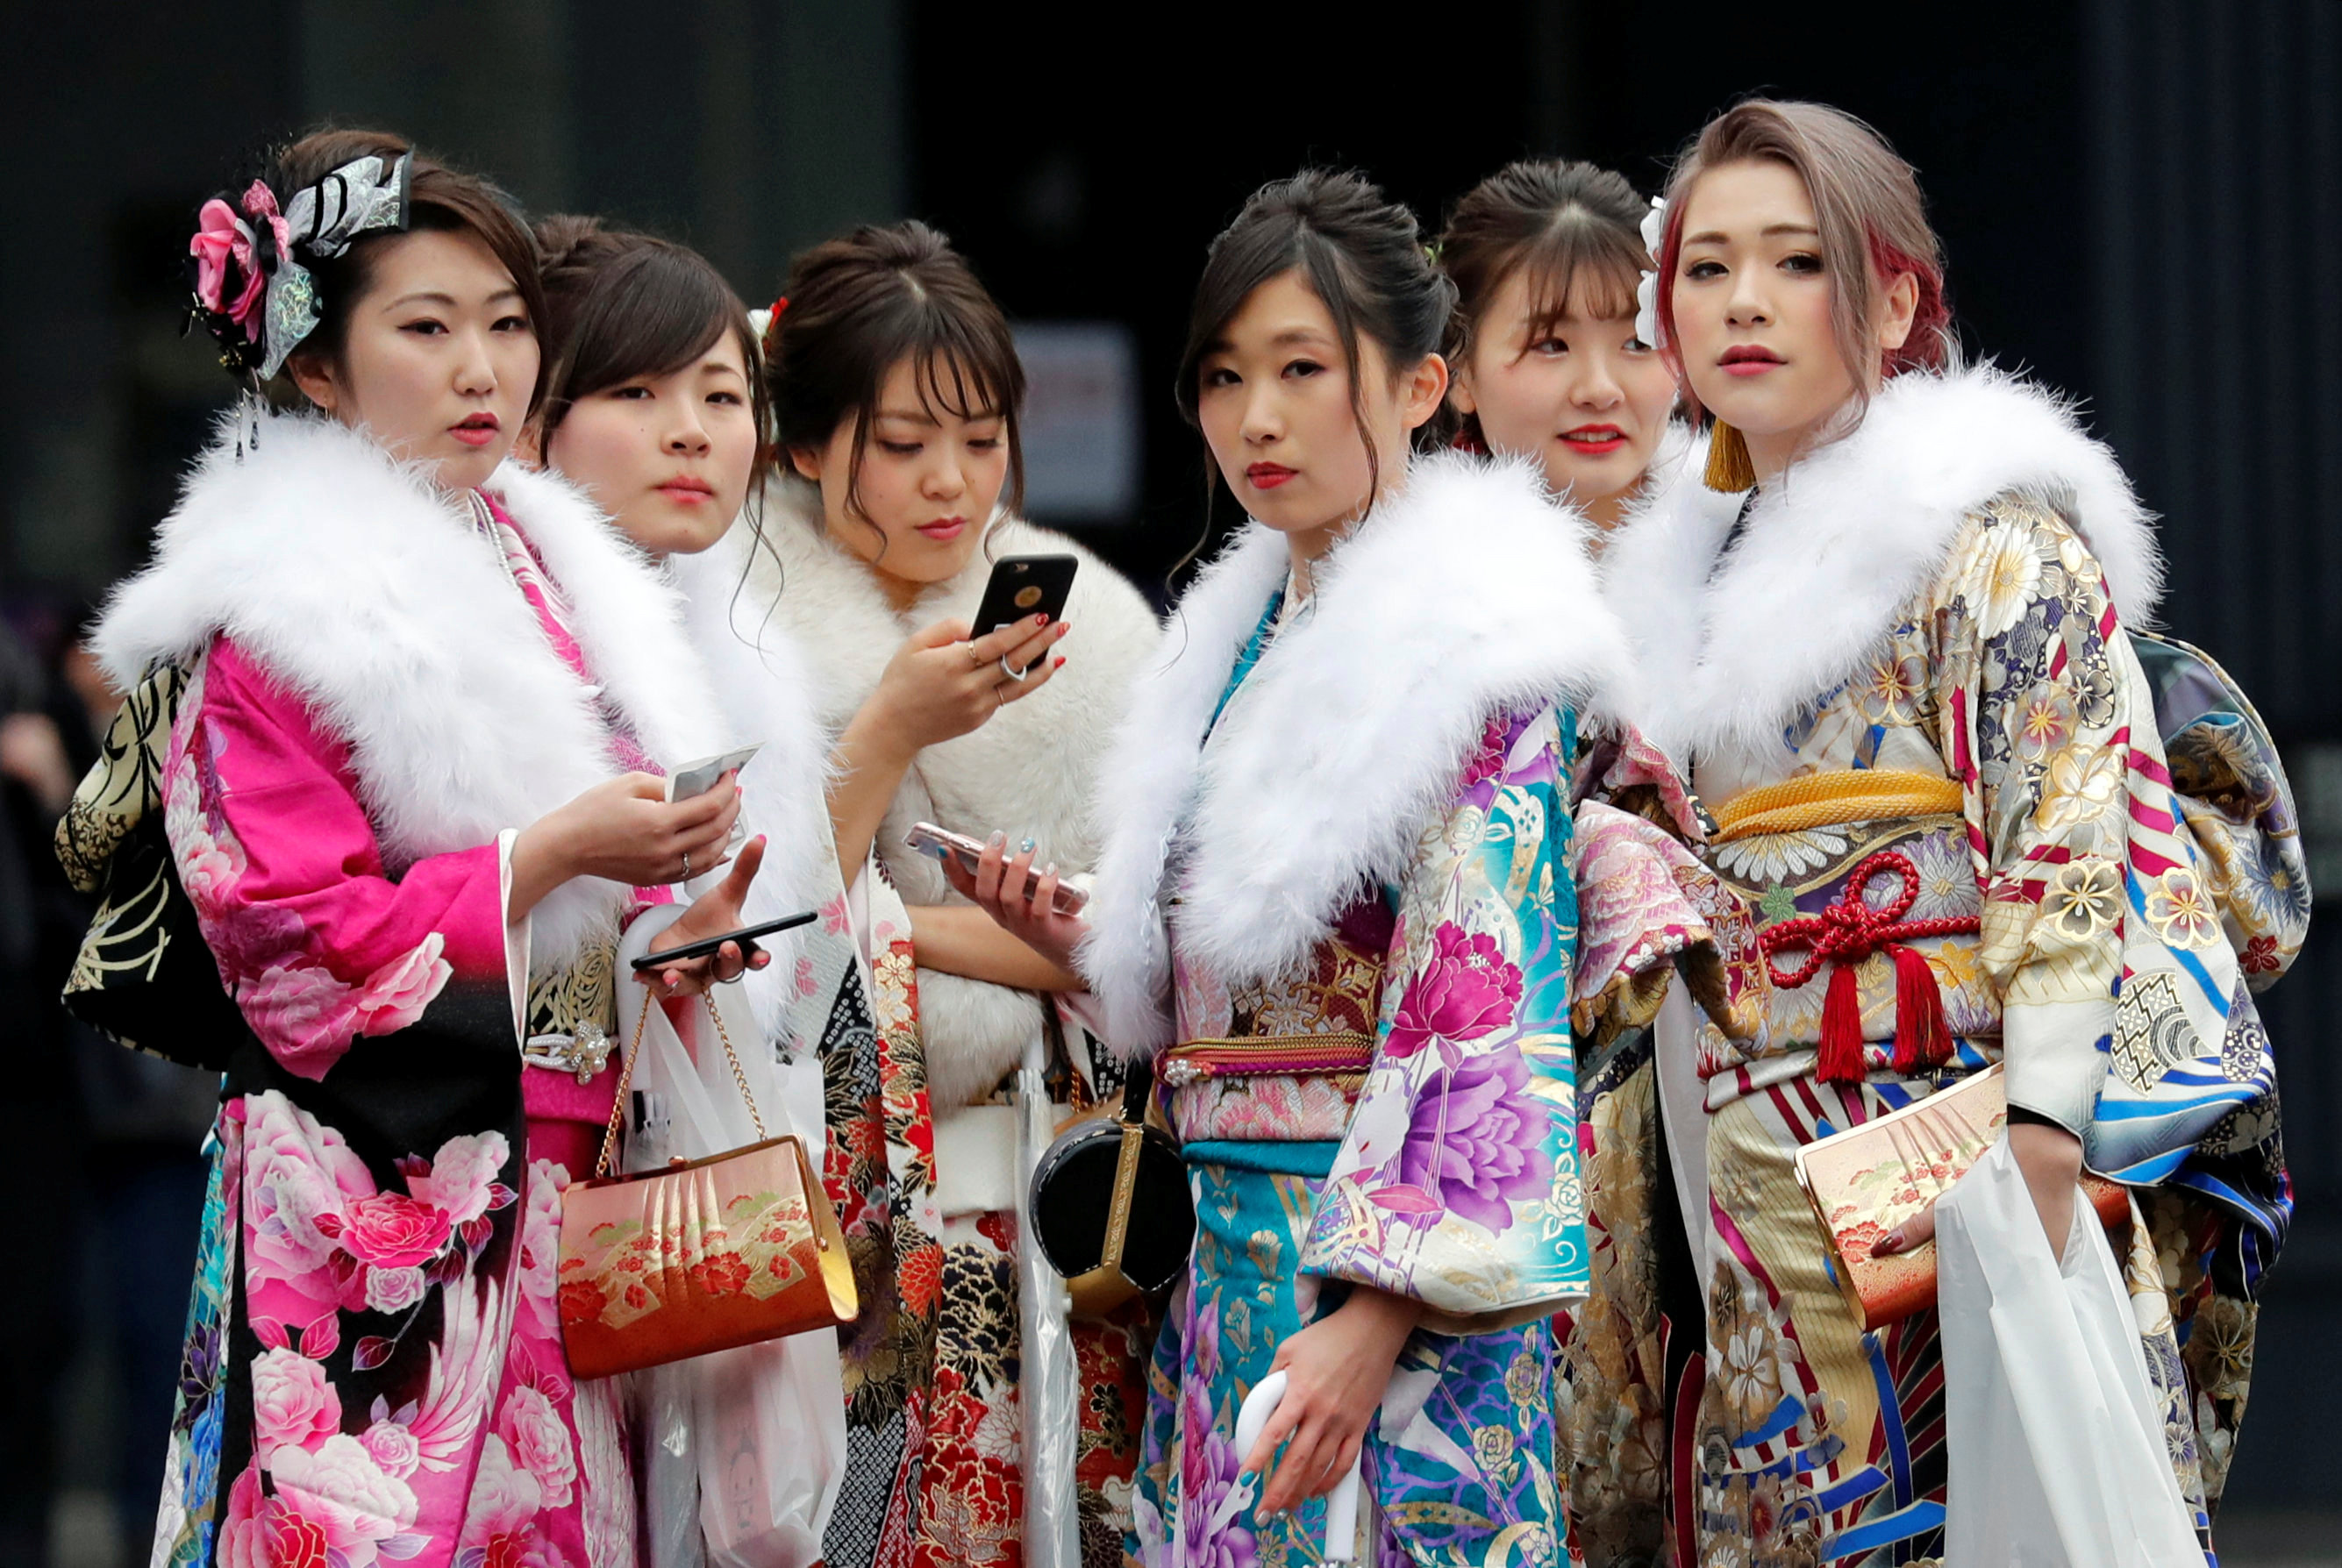 Women wearing kimono attend their Coming-of-Age Day celebration ceremony at an amusement park in Tokyo on Jan. 8. According to data provided by the 23 ward offices, 10,959 new non-Japanese adults live in central Tokyo, or 13 percent of the 83,764 new adults living in the city. | REUTERS